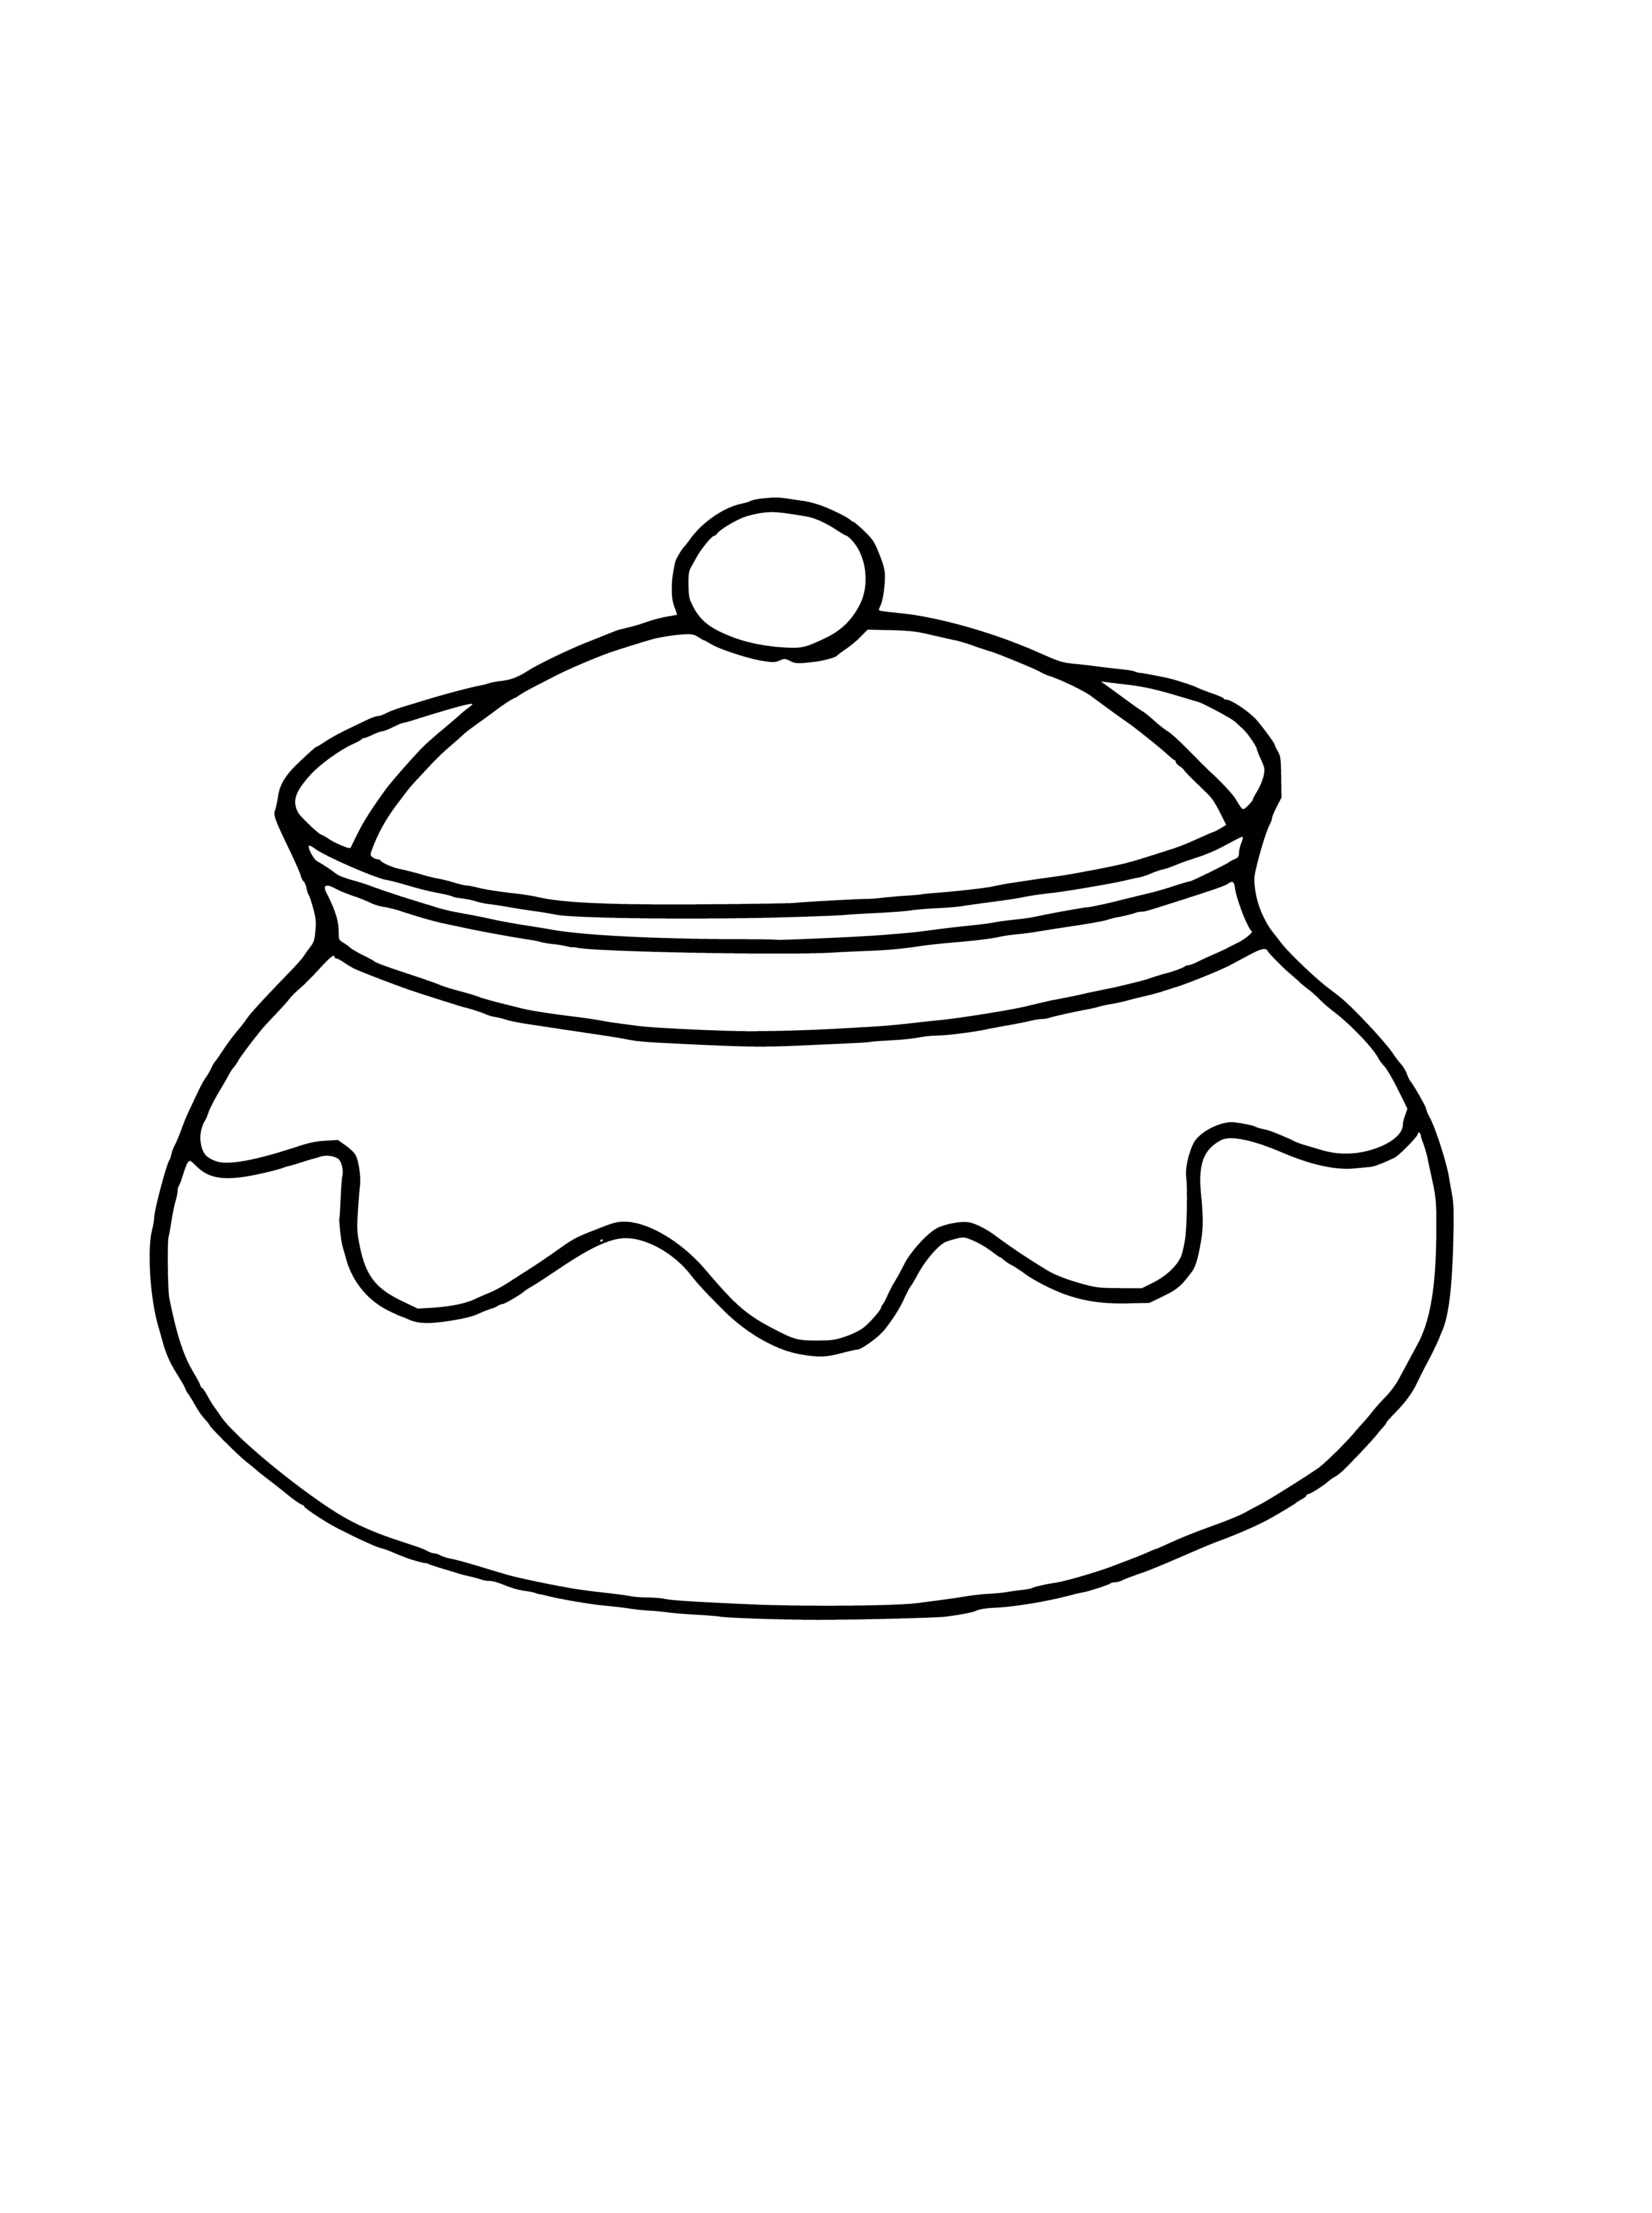 Pot with lid coloring page